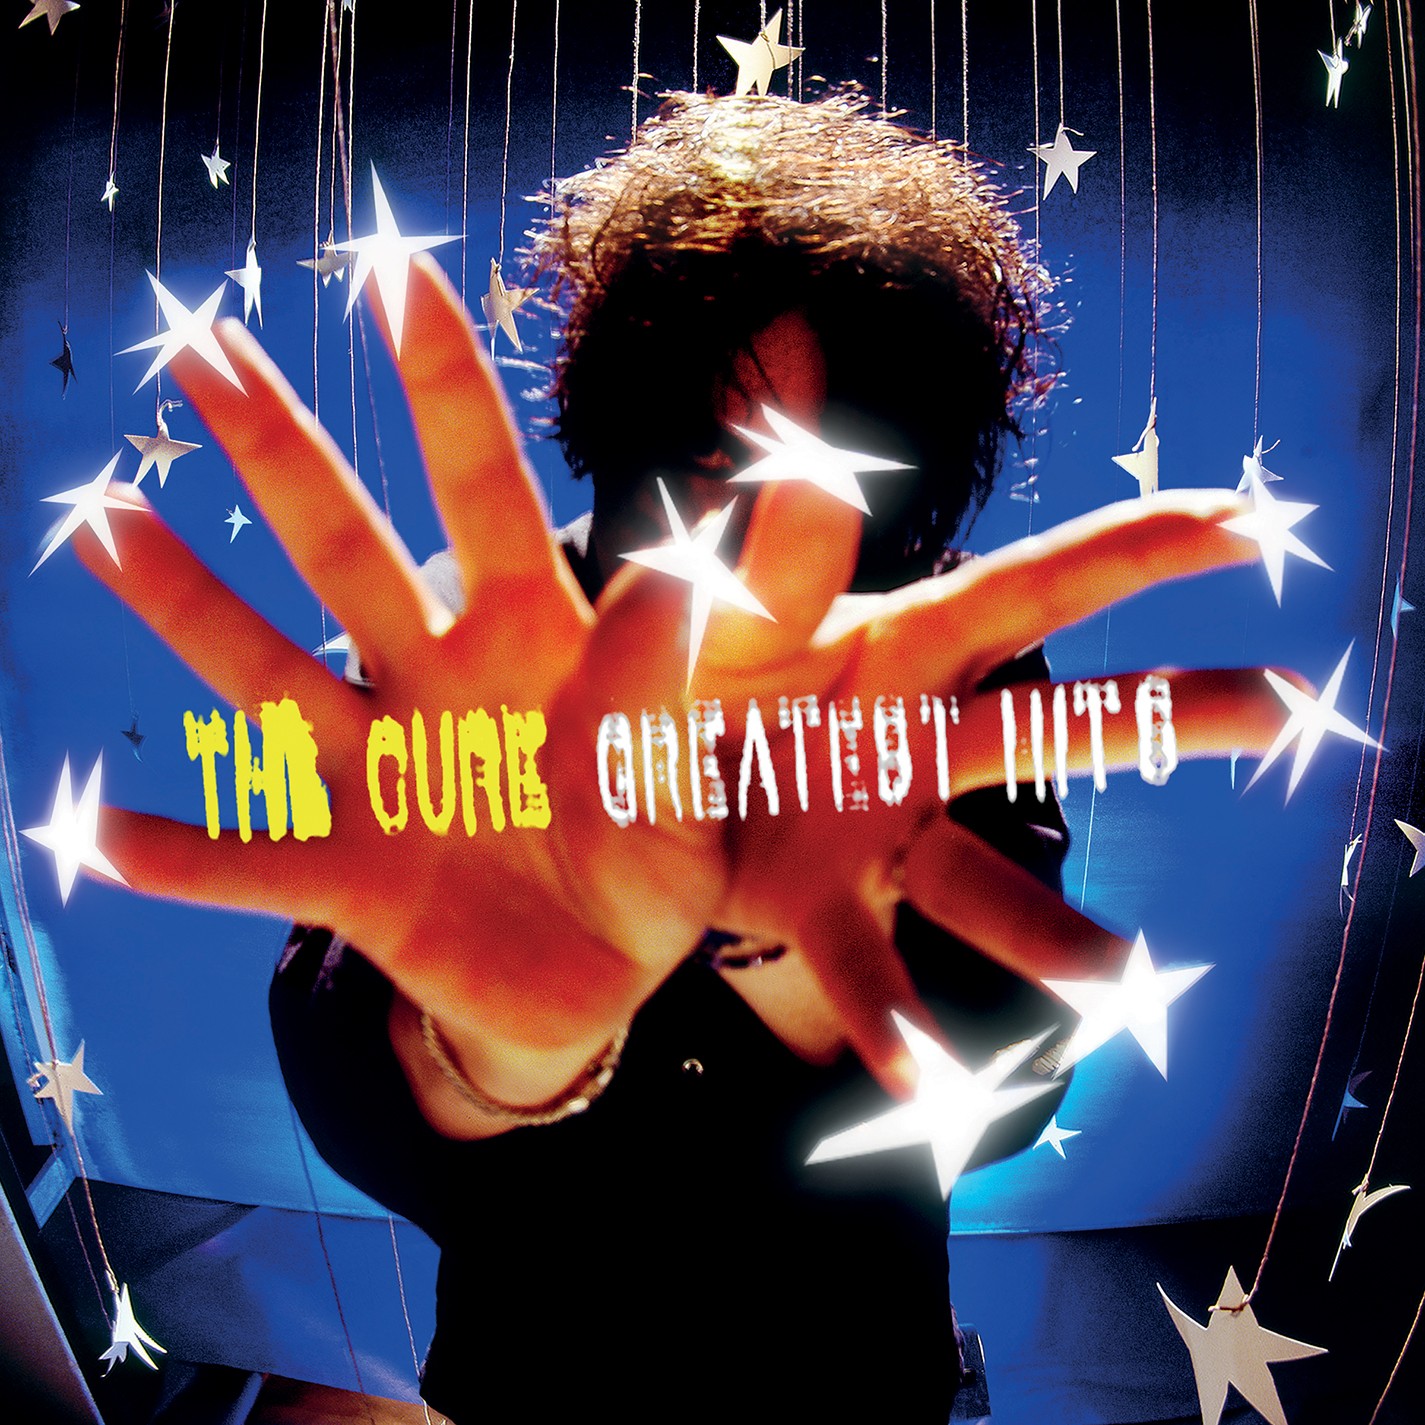 The Cure - The Greatest Hits 2XLP Vinyl